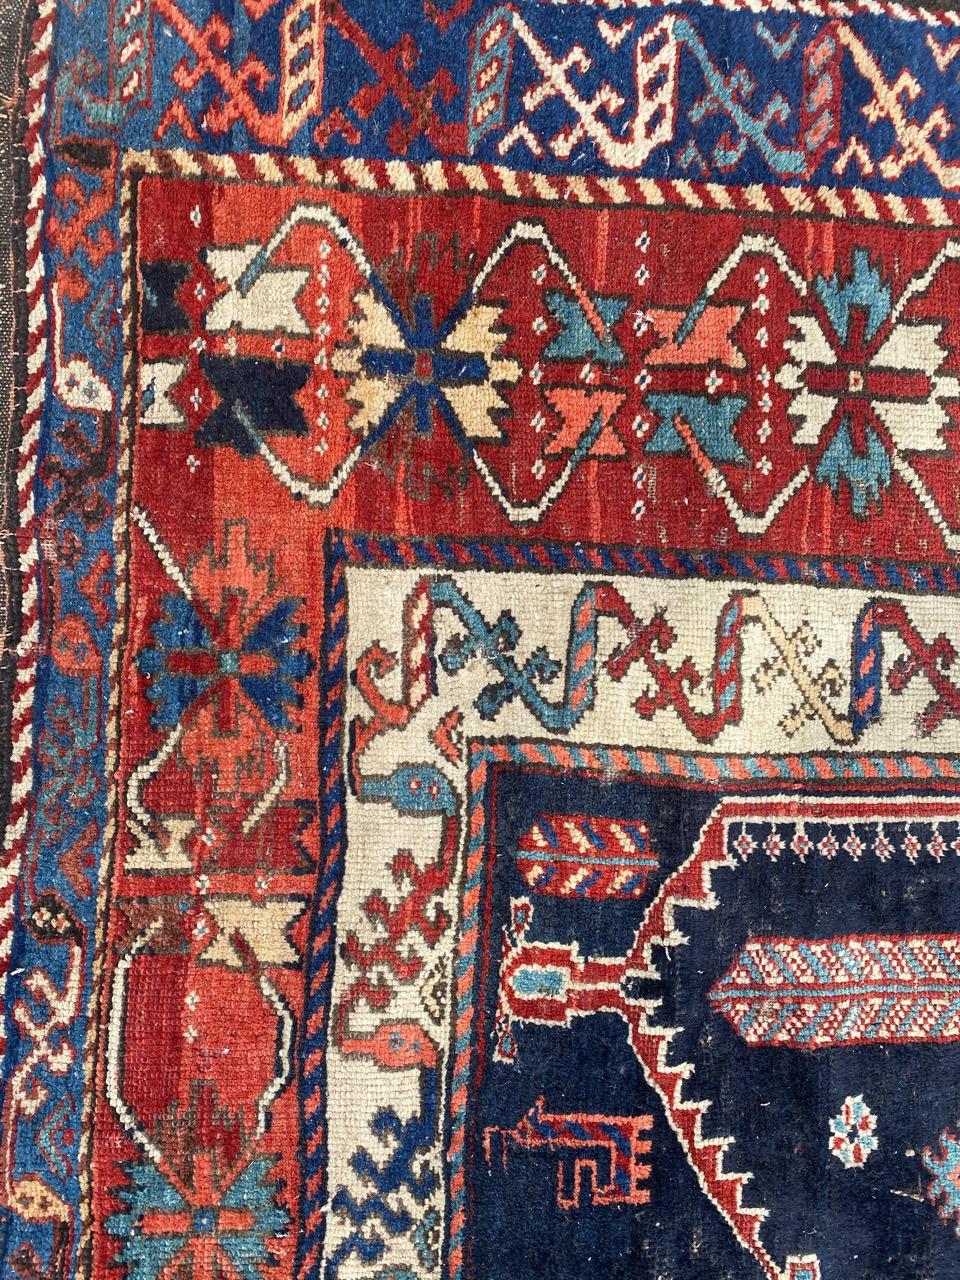 Very beautiful antique Kurdish or north western rug with beautiful tribal design and nice natural colors, entirely hand knotted with wool velvet on wool foundation

✨✨✨
